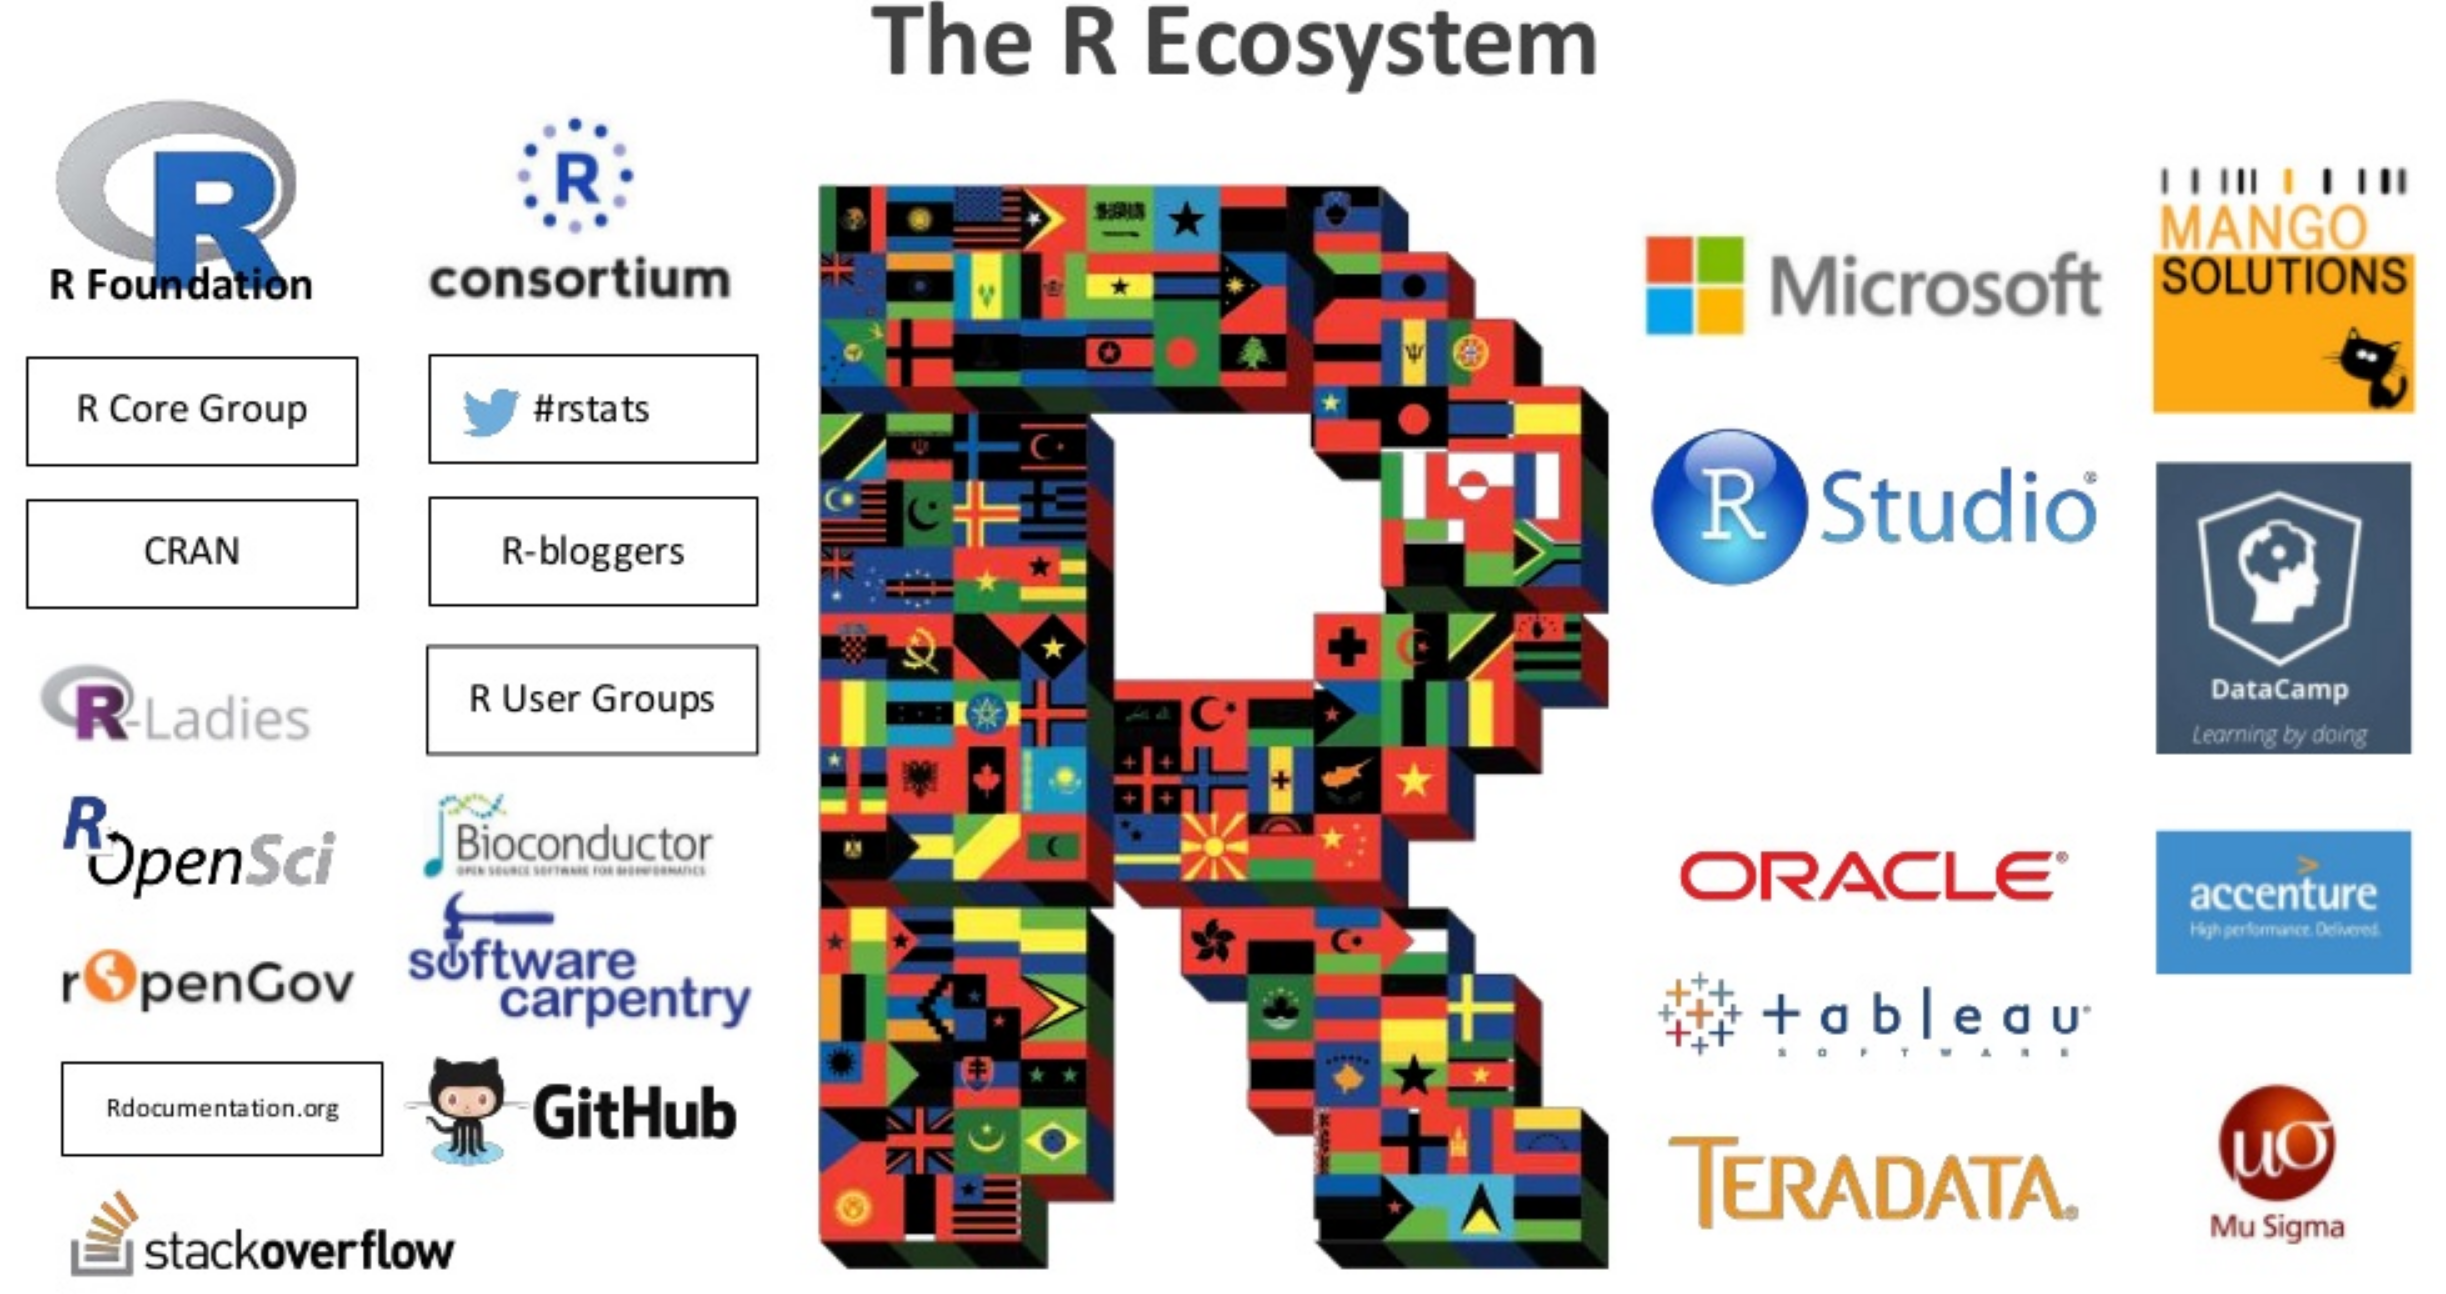 Some of the “major players” in the R Ecosystem (due to David Smith, 2017)